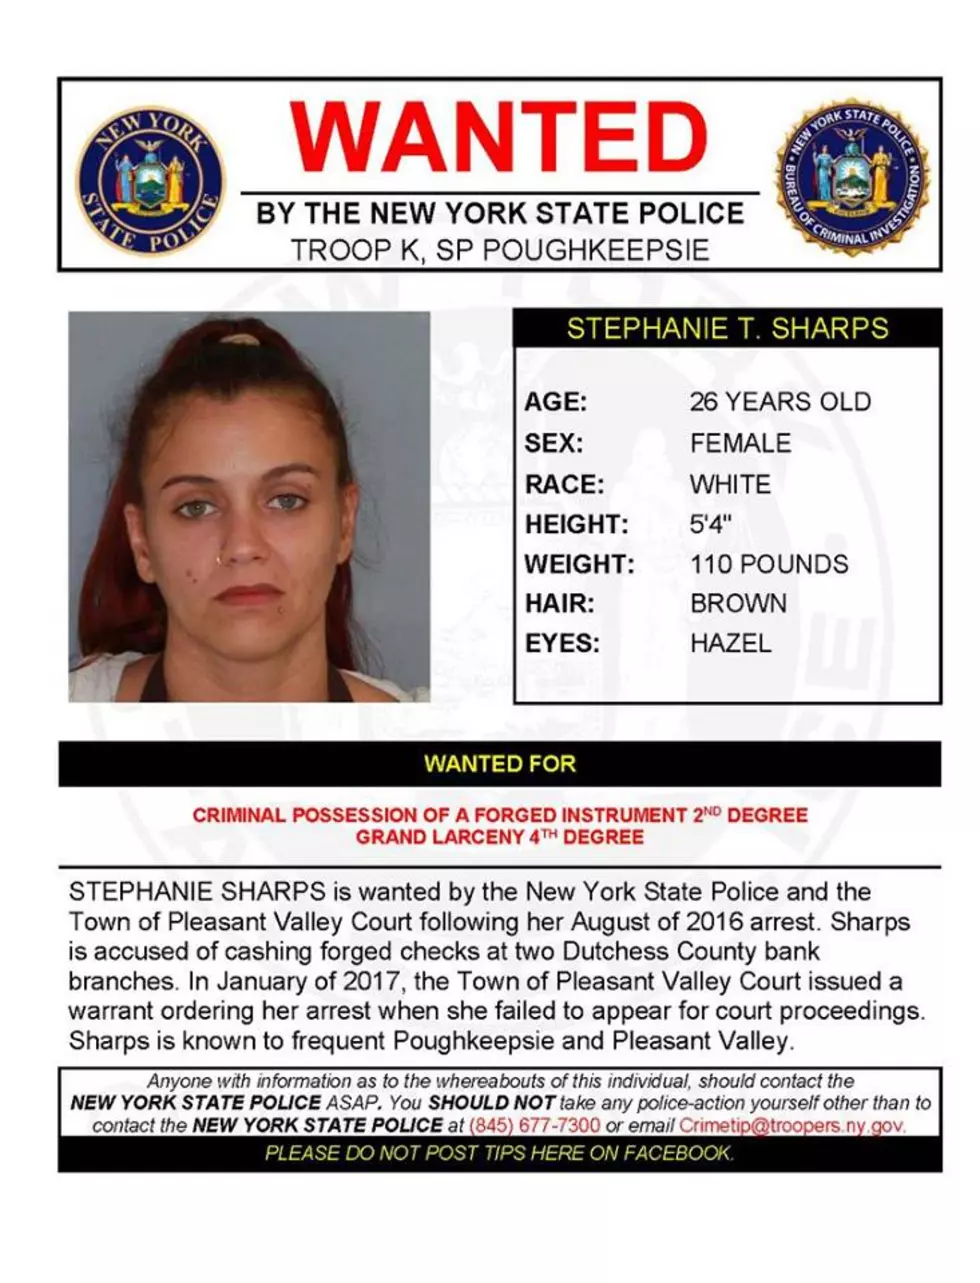 Warrant Wednesday: Dutchess County Woman Wanted For Grand Larceny